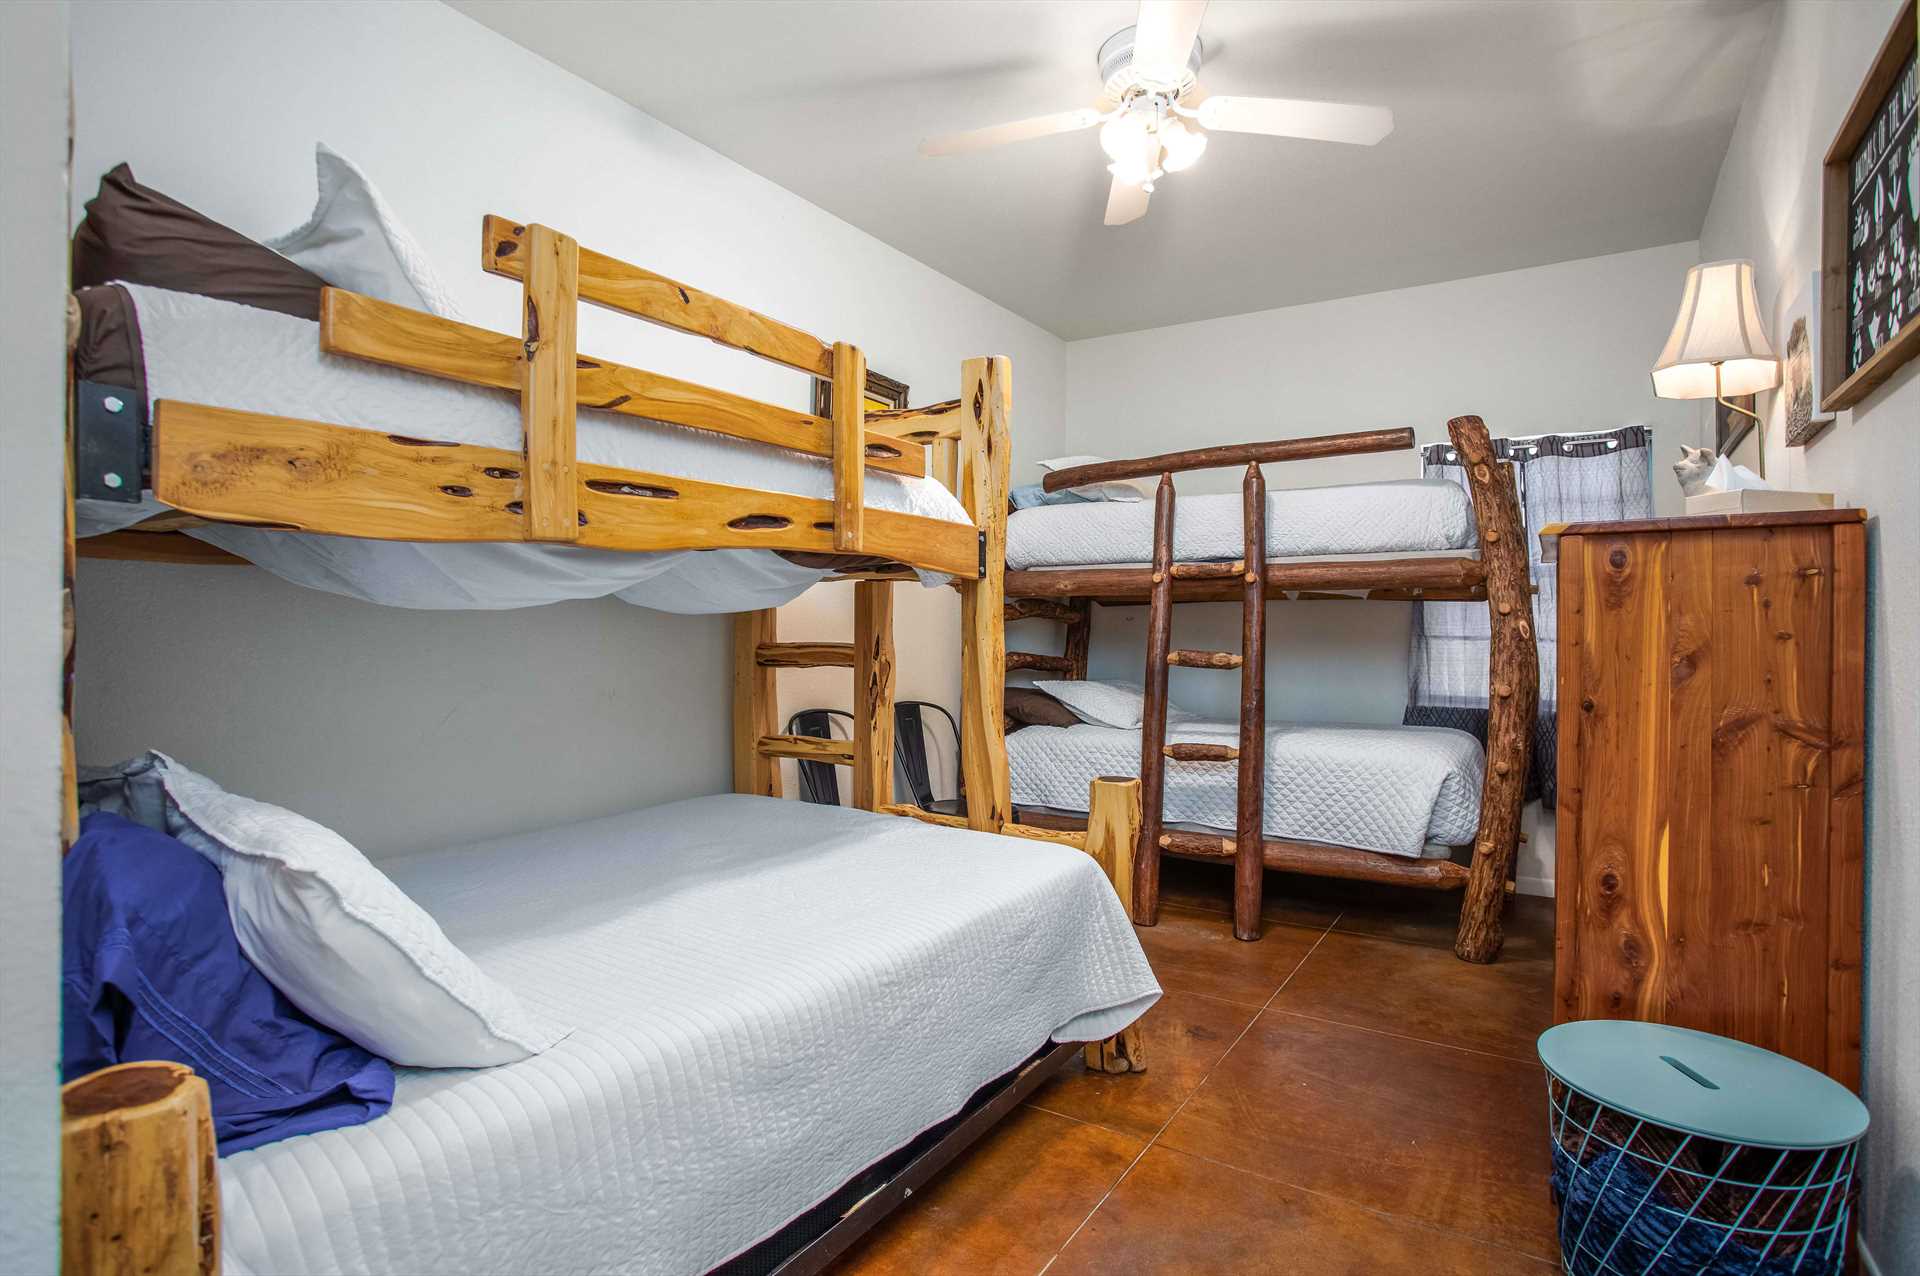                                                 A full/twin bunk bed setup, and one that's twin/twin, comprise the sleeping space in the fourth bedroom. It's a great slumber space for the little ones!